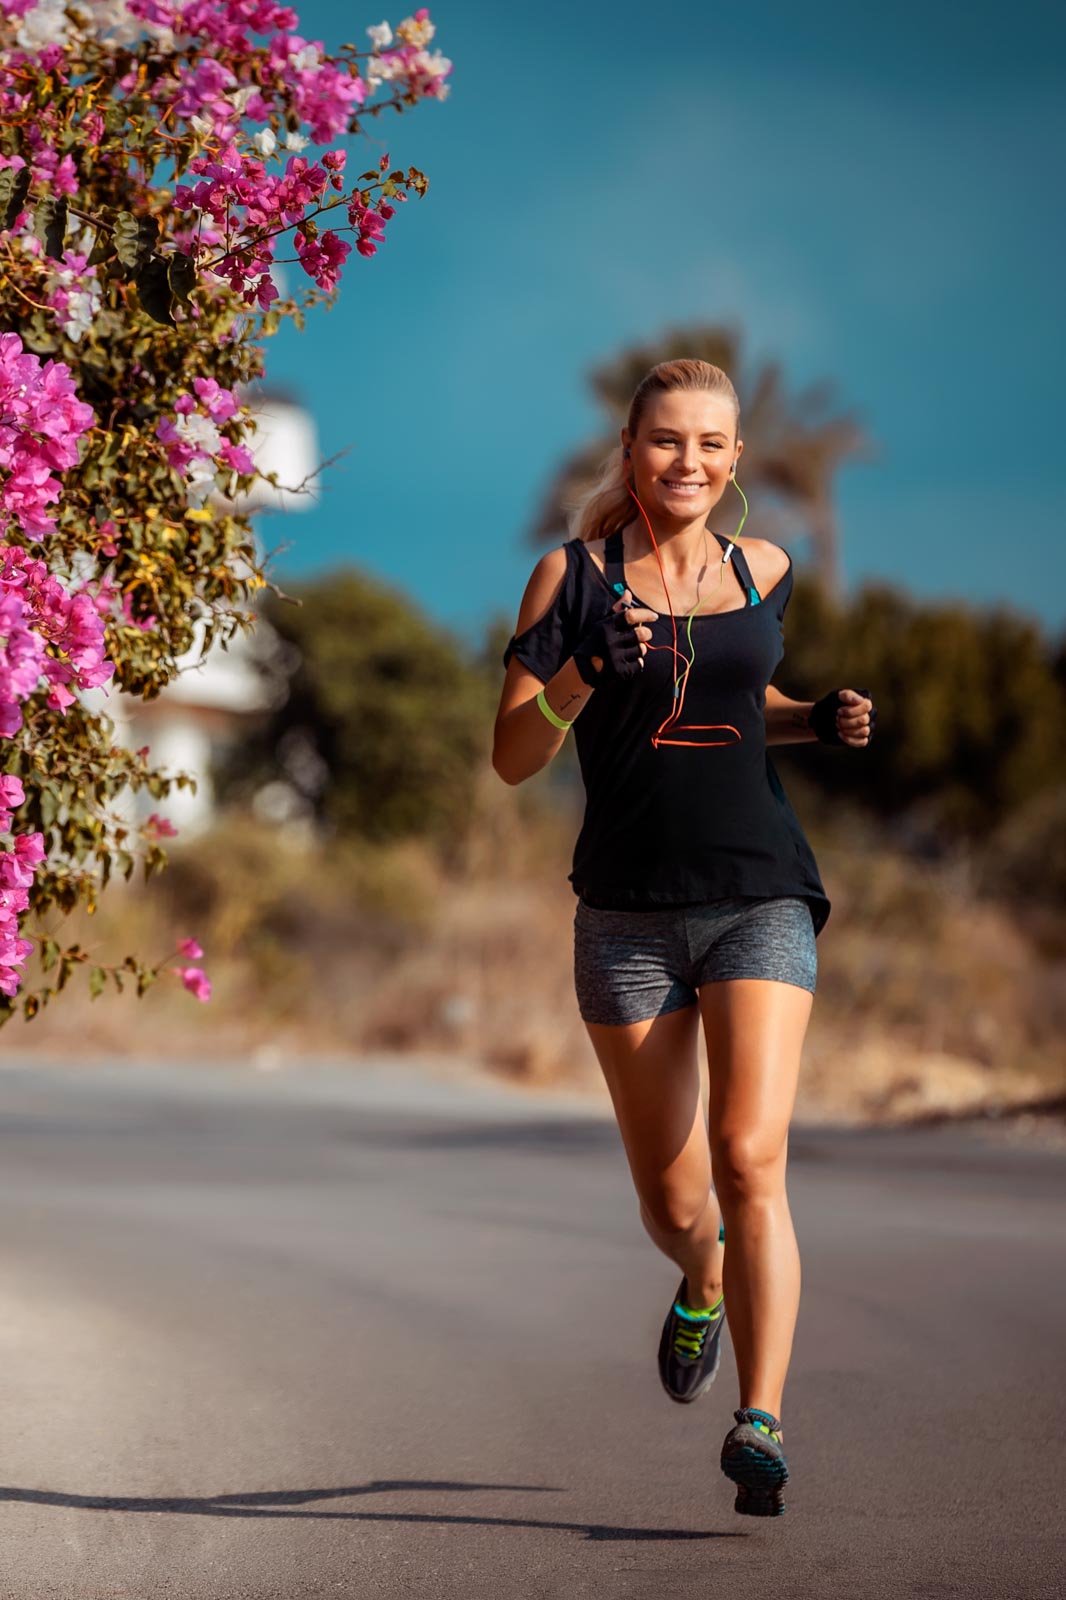 Running strong and pain-free in Santa Ana thanks to California Sports and Spine Center.